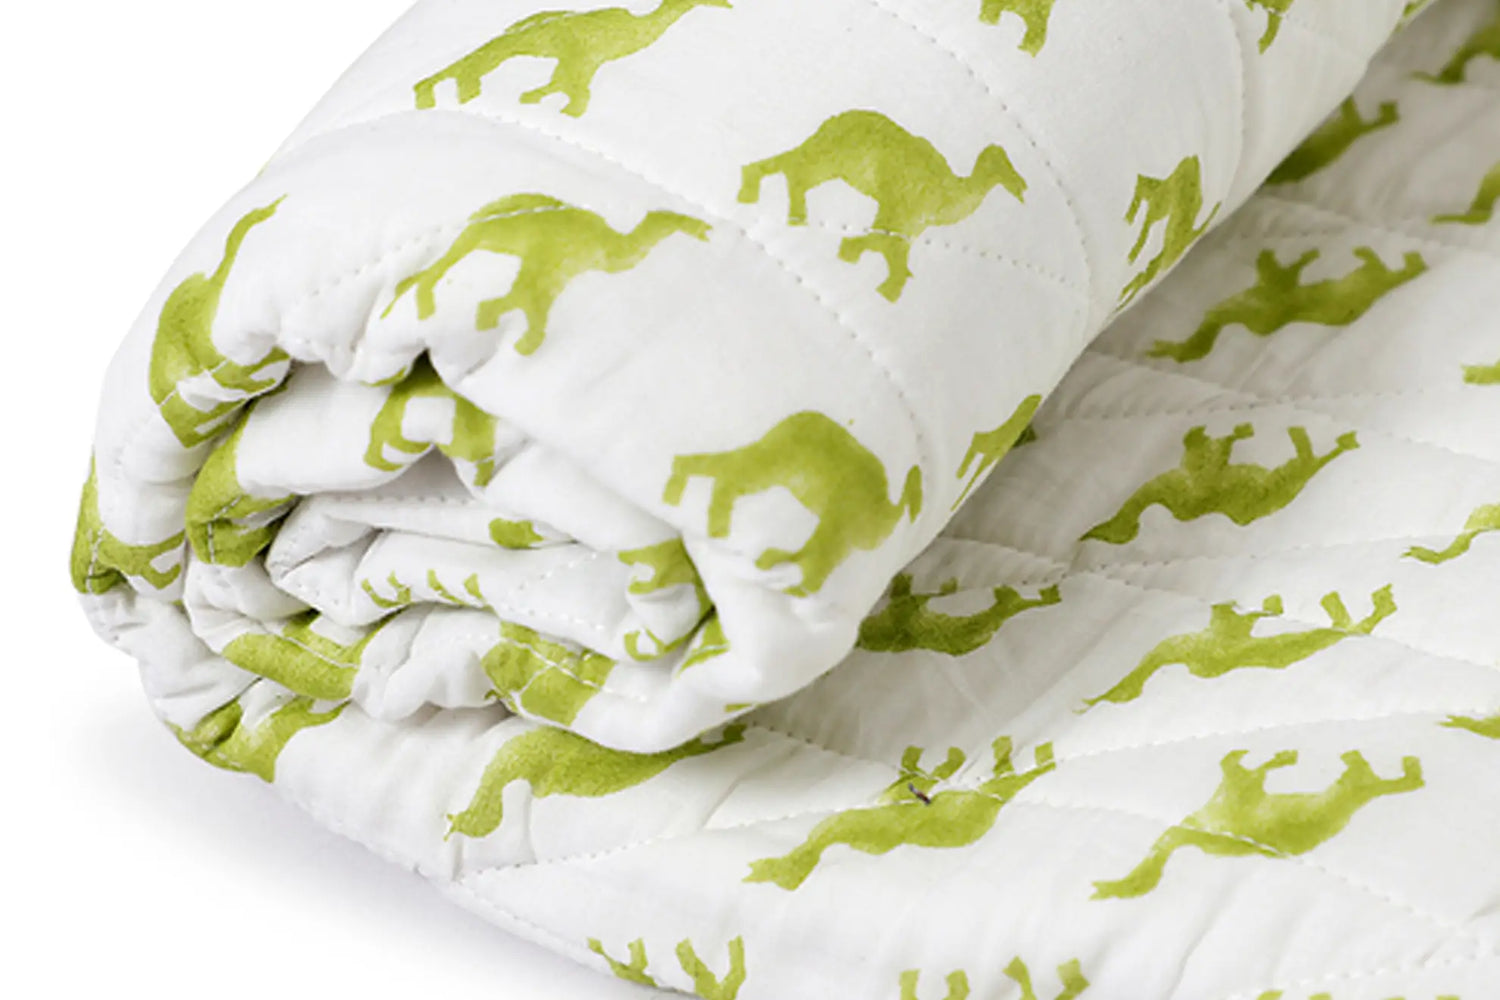 Camel Carnival - Hand Block Printed Camel Baby Quilt